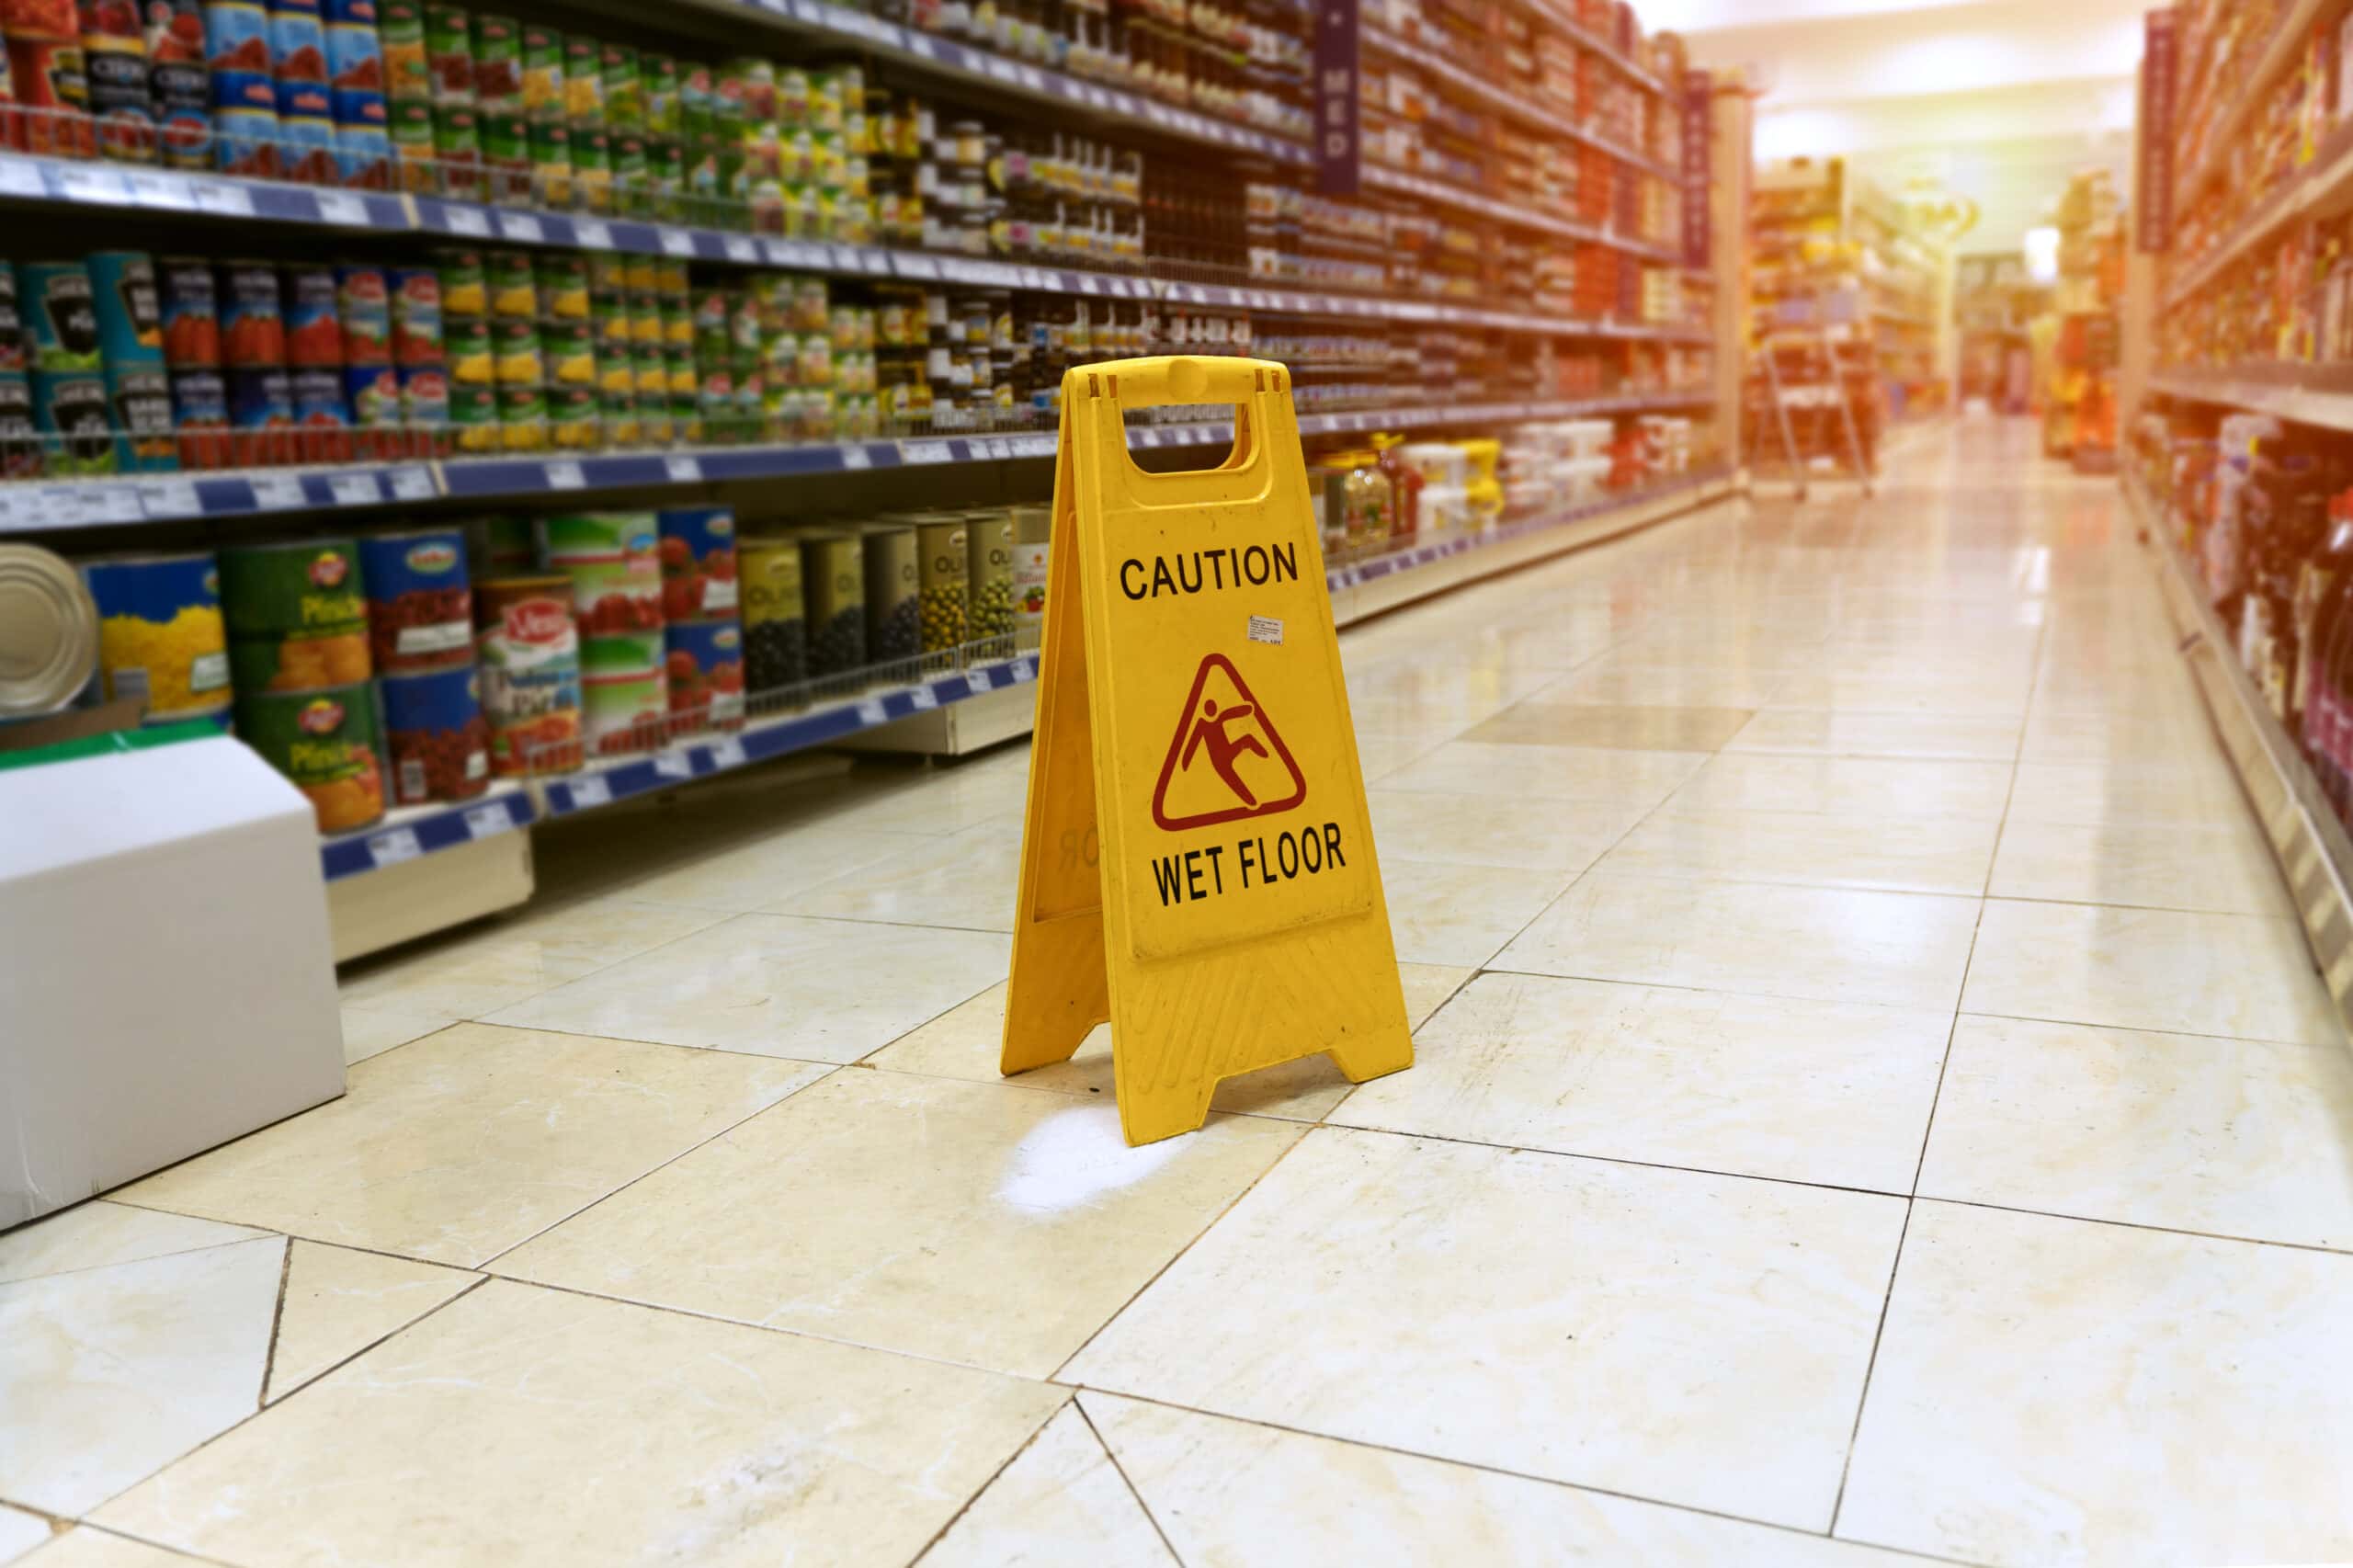 Wet floor sign in shopping centre to prevent public liability slips and falls